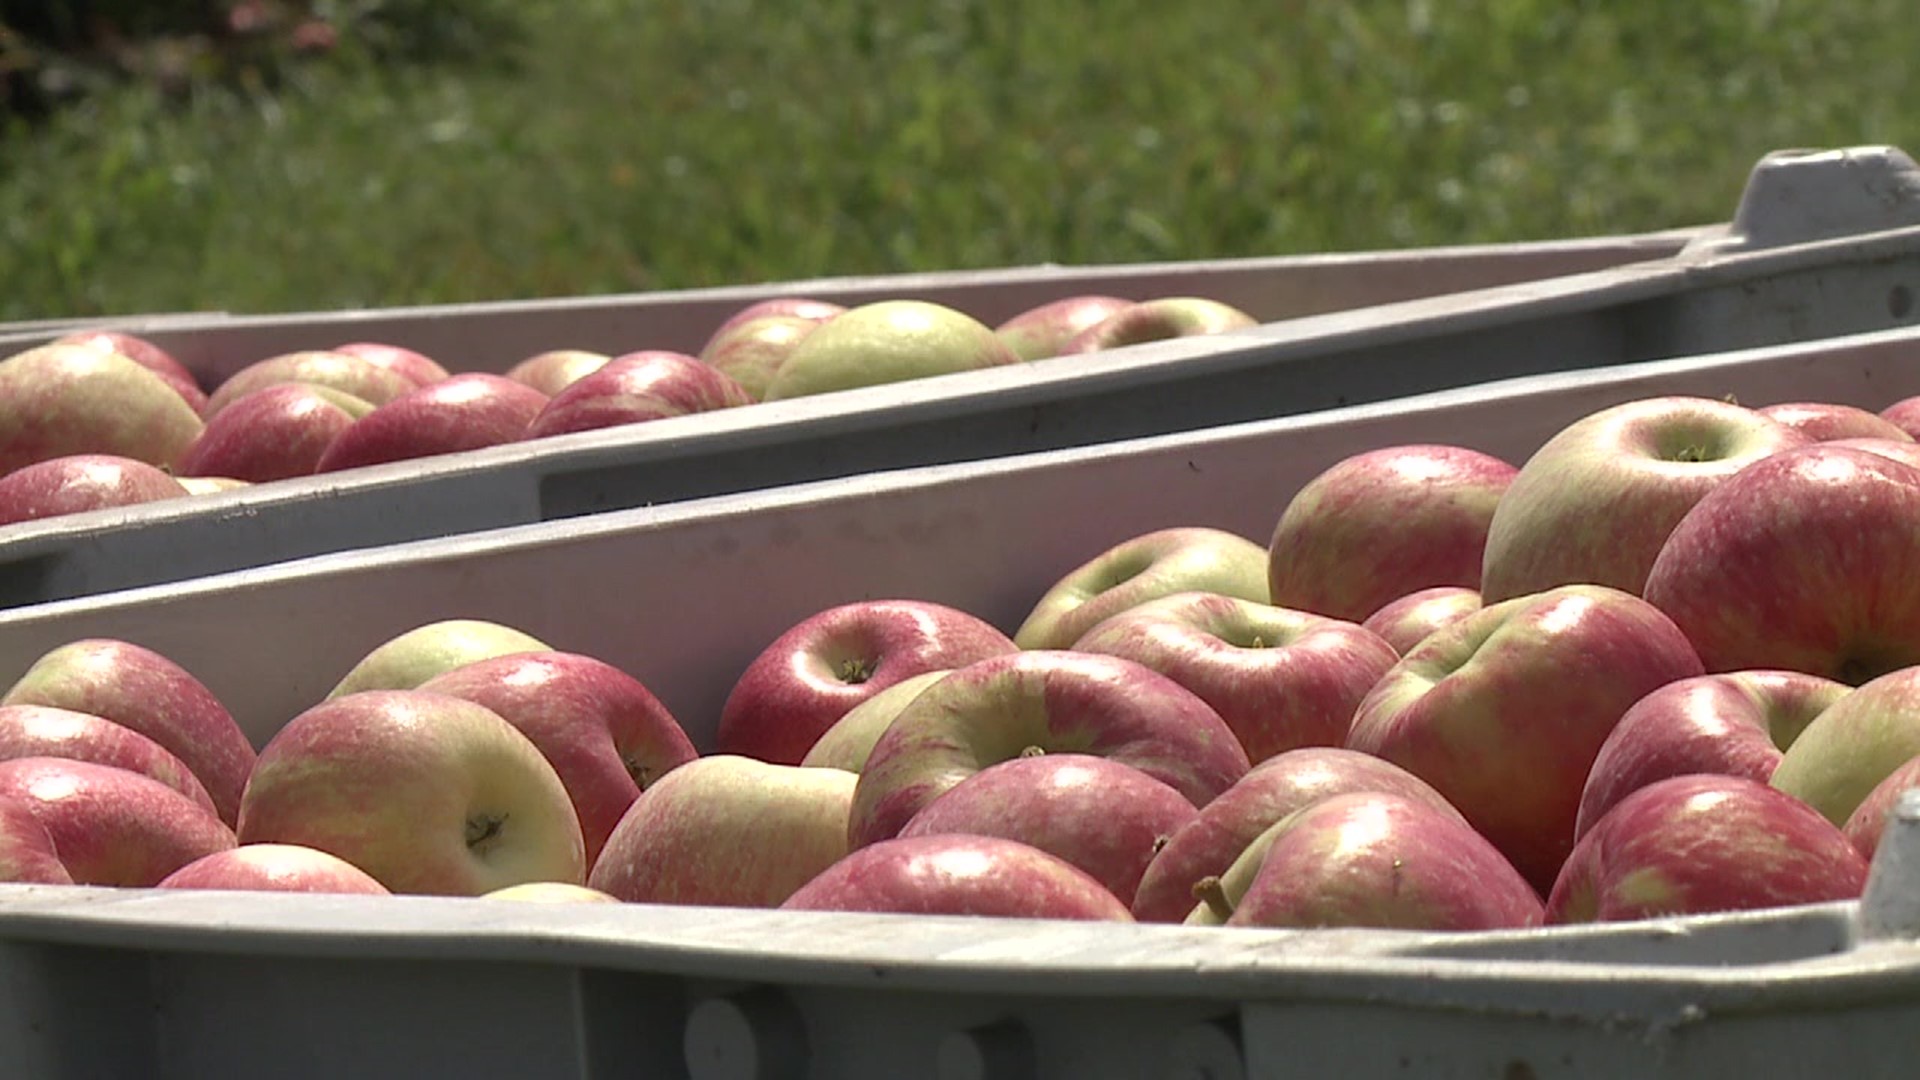 Heading into the core of the season, folks at Heller Orchards say the apples are ripe for picking.